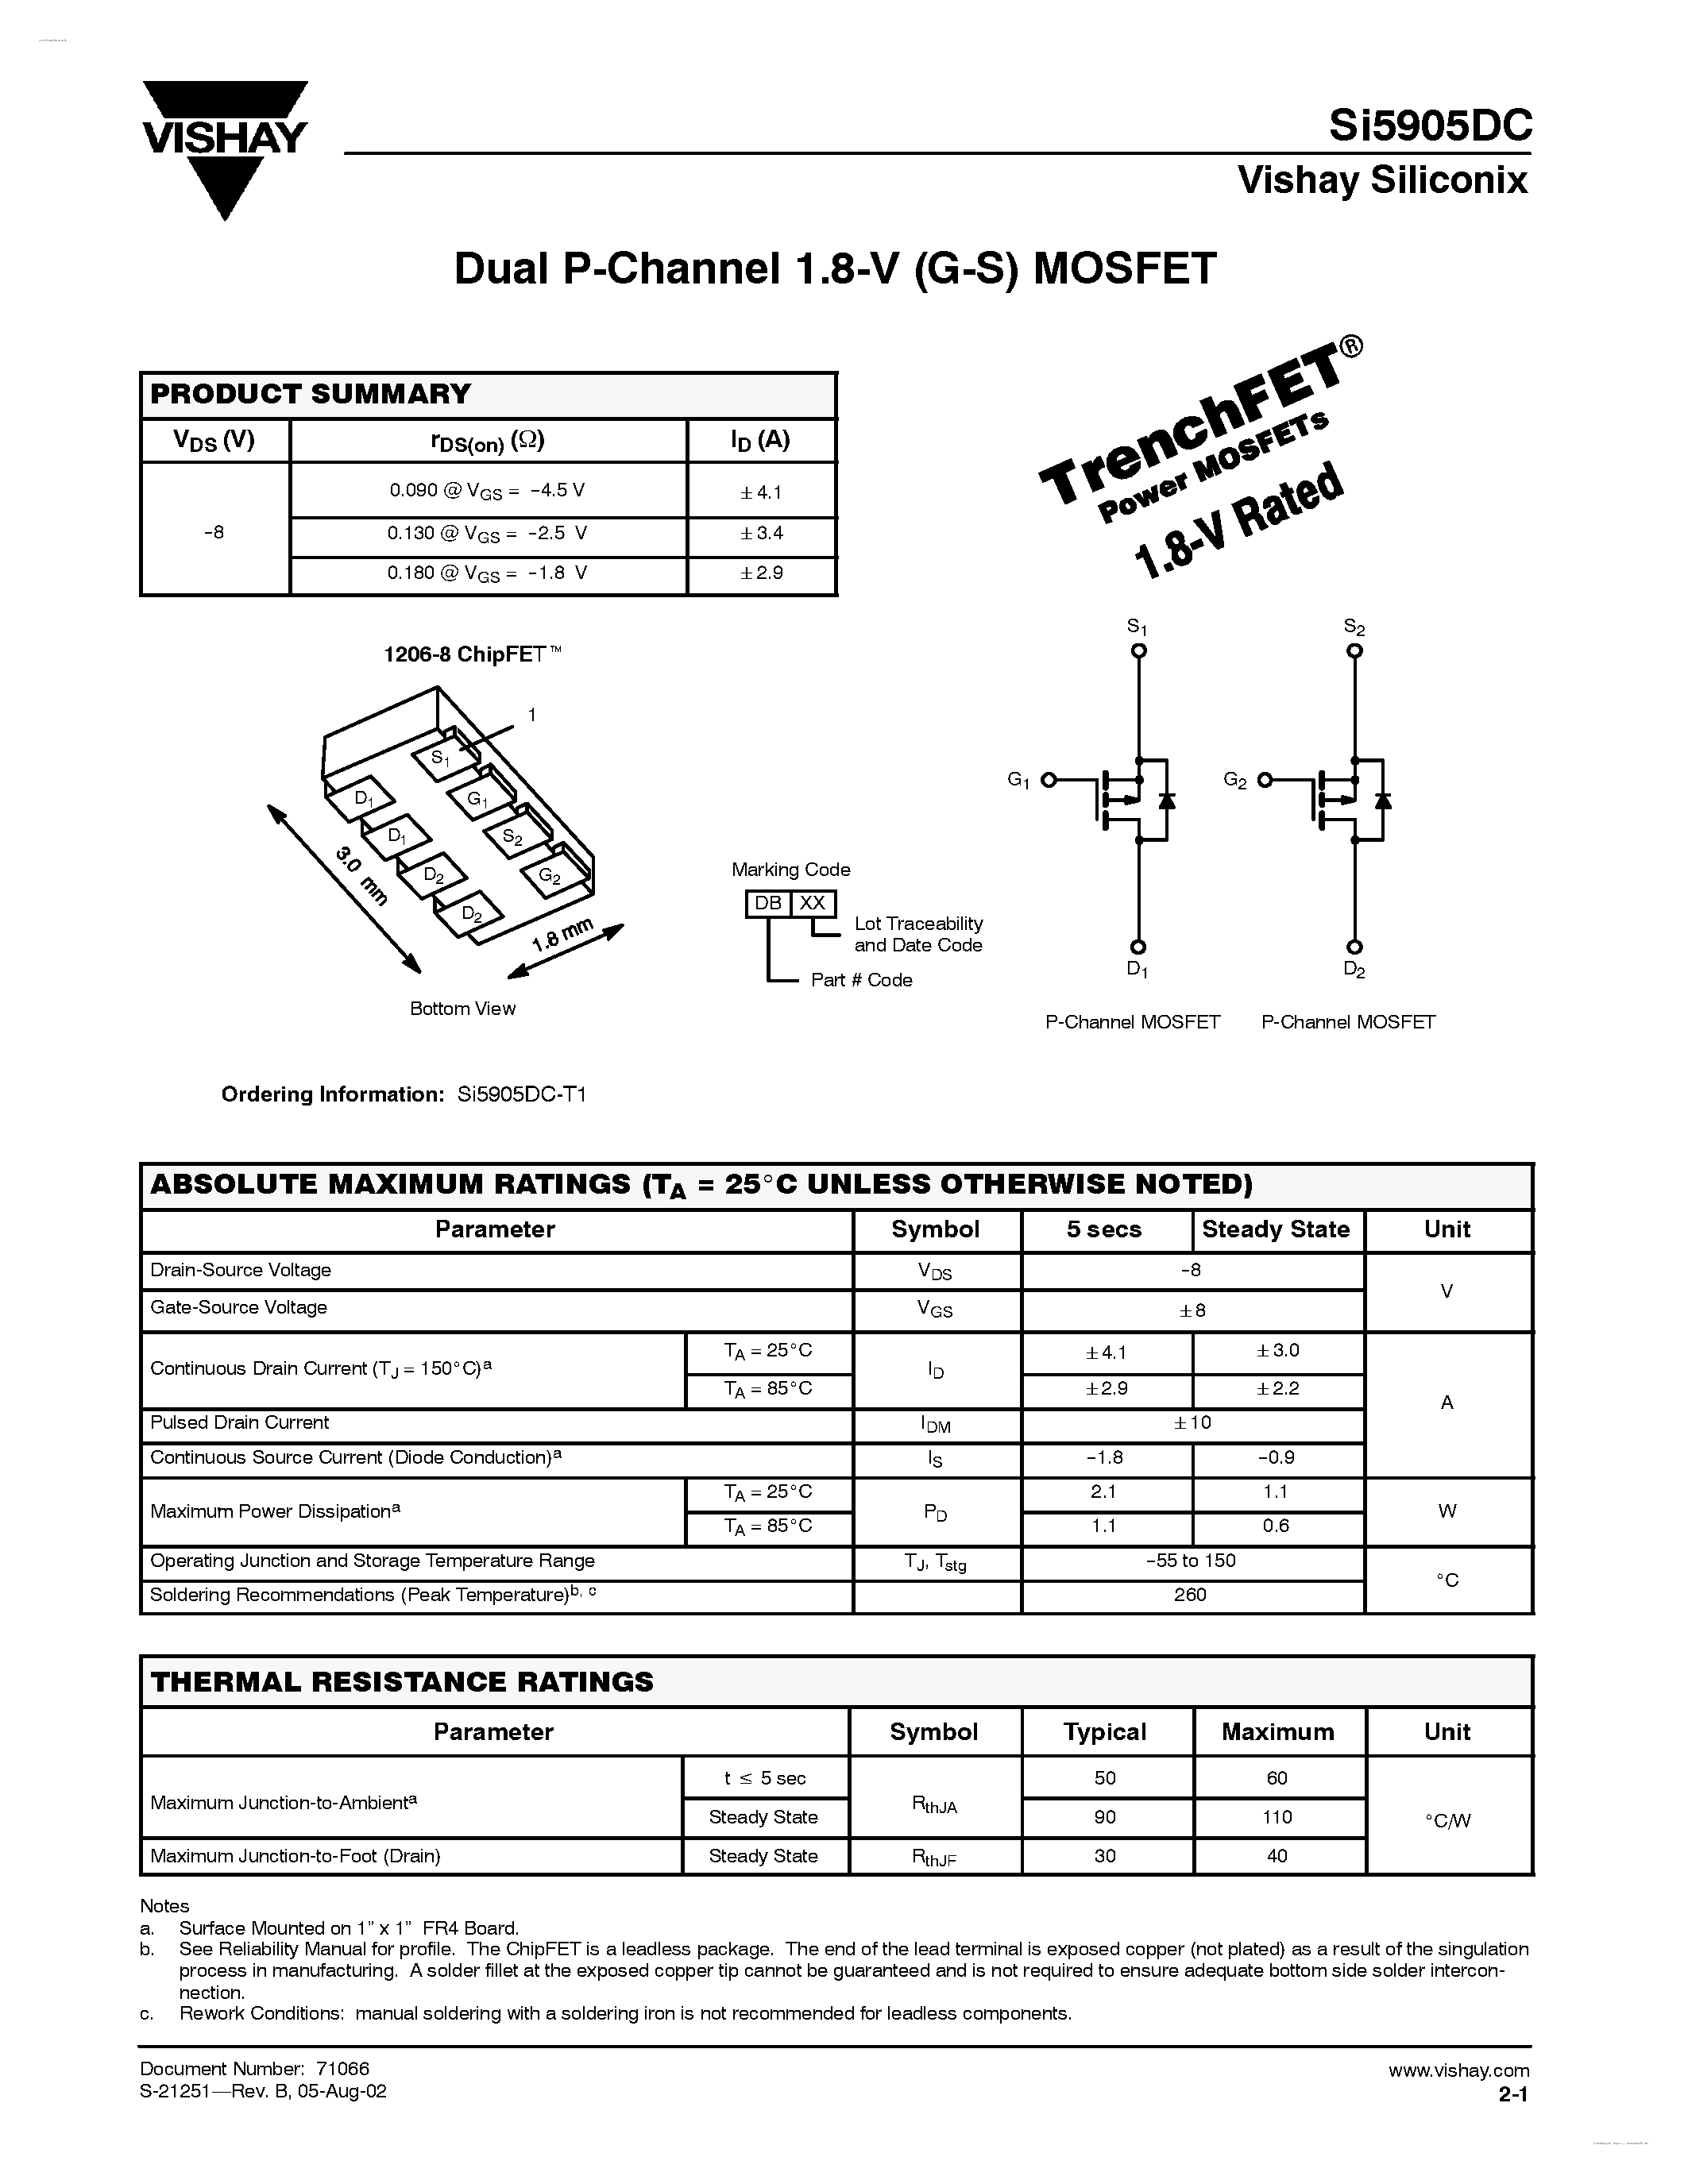 Даташит SI5905DC - Dual P-Channel 1.8-V (G-S) MOSFET страница 1